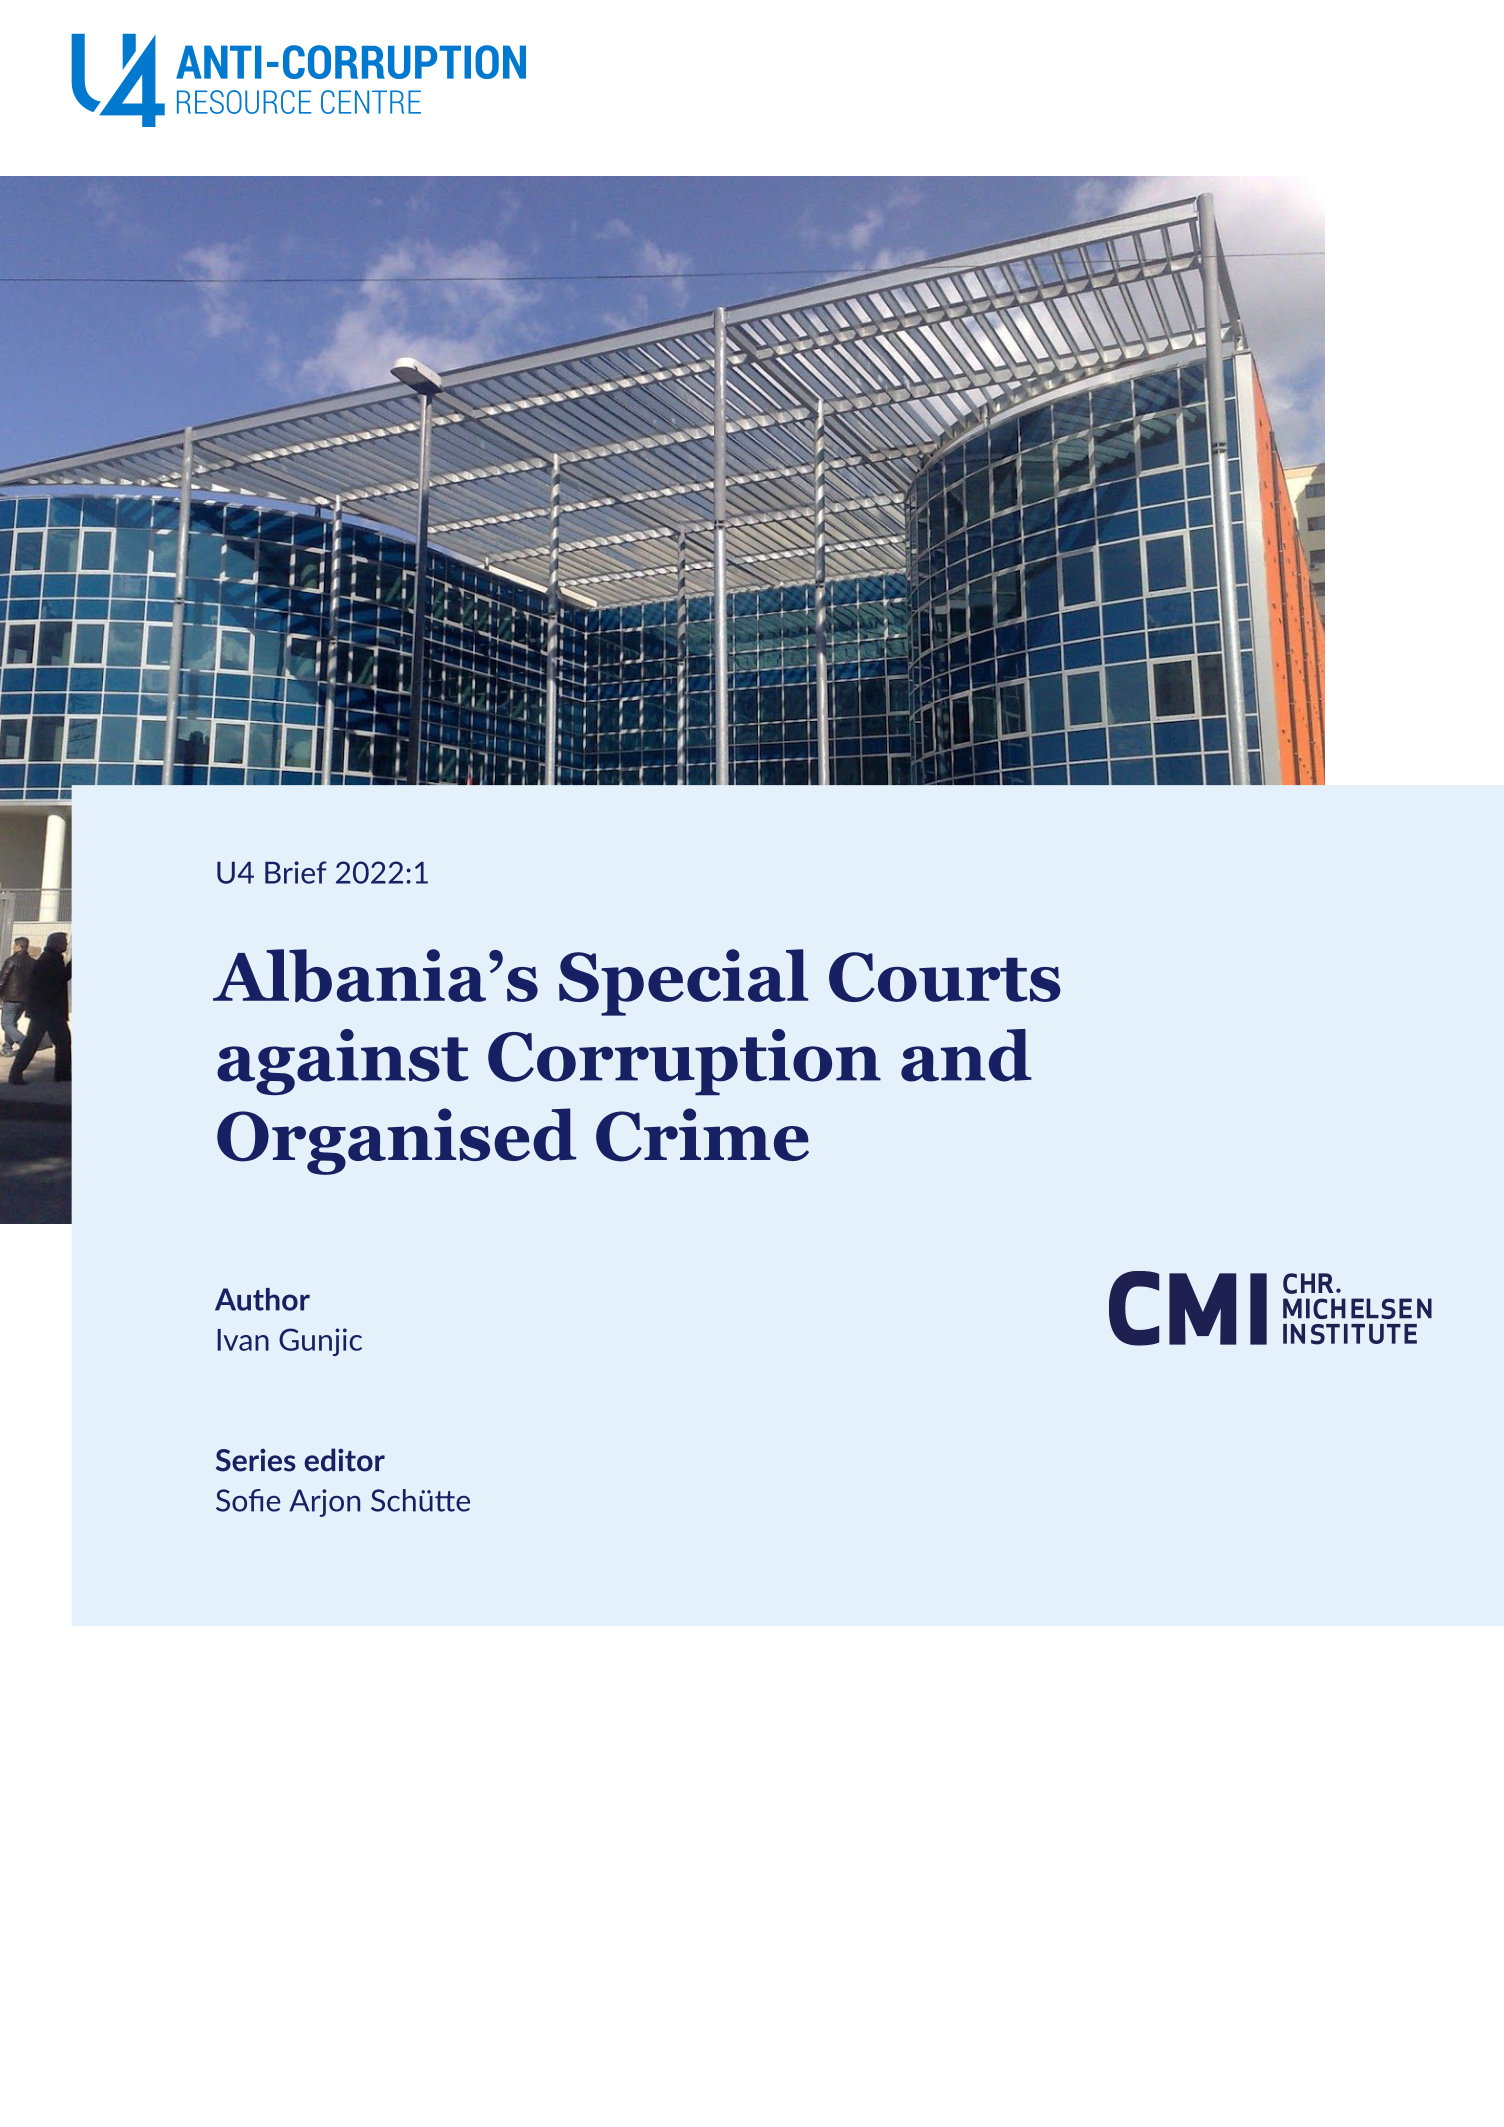 Albania’s Special Courts against Corruption and Organised Crime